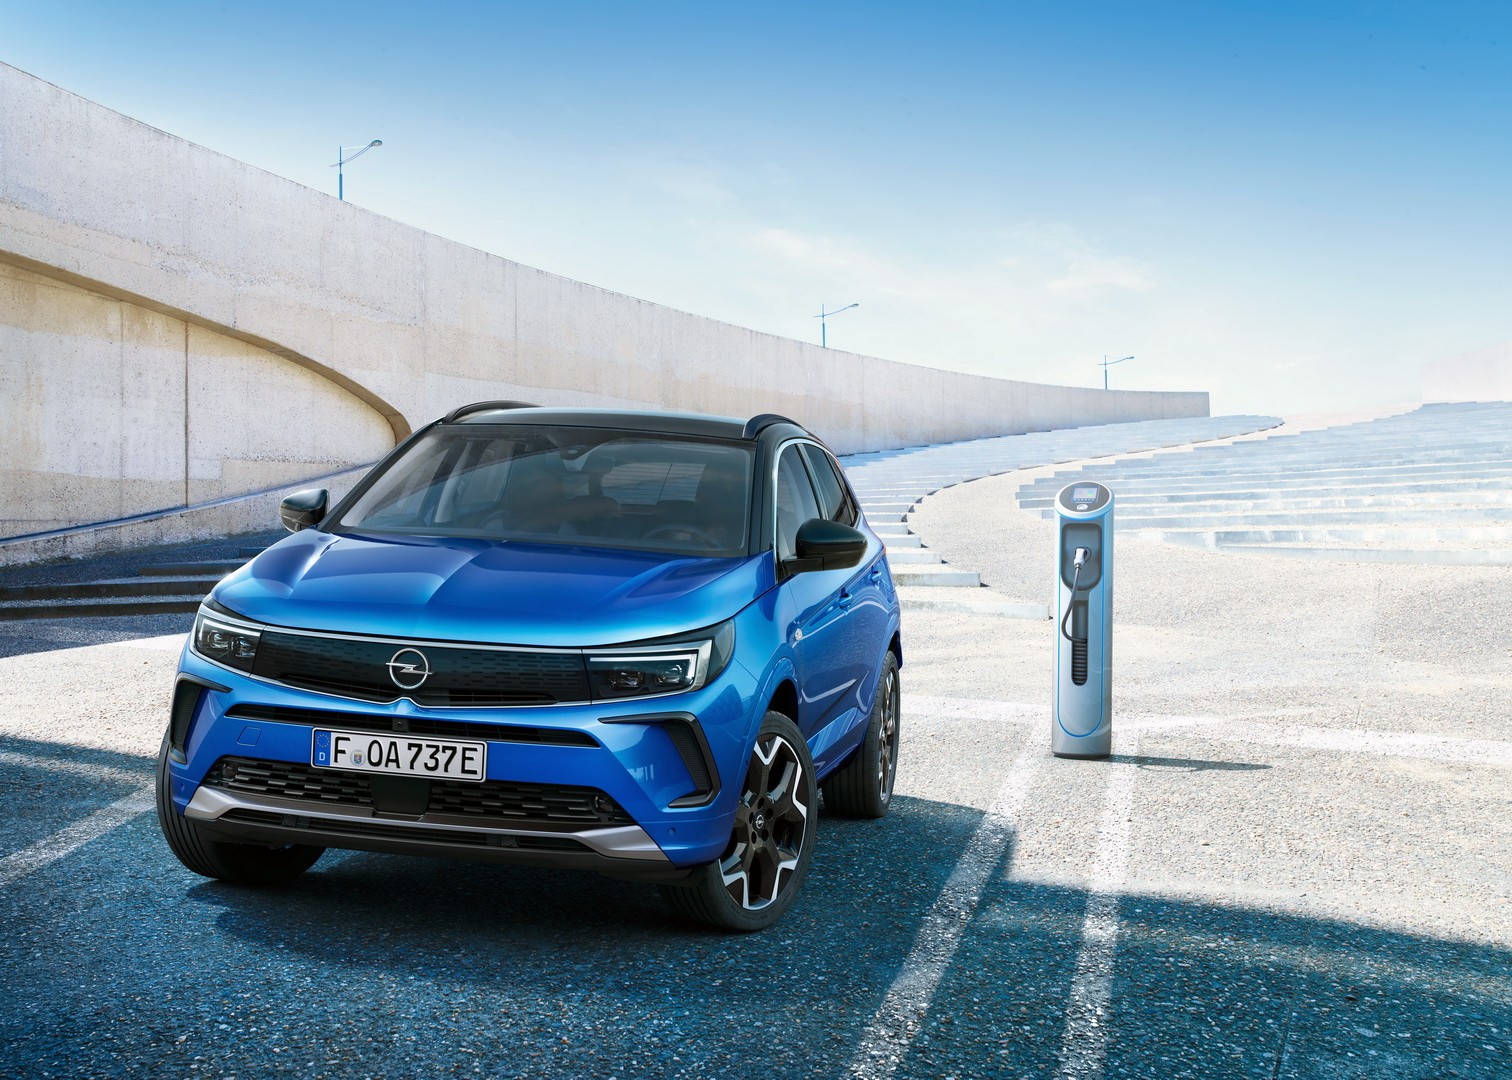 2022 Opel Grandland Crossover Breaks Cover With Updated Looks, Brand-New  Tech - autoevolution